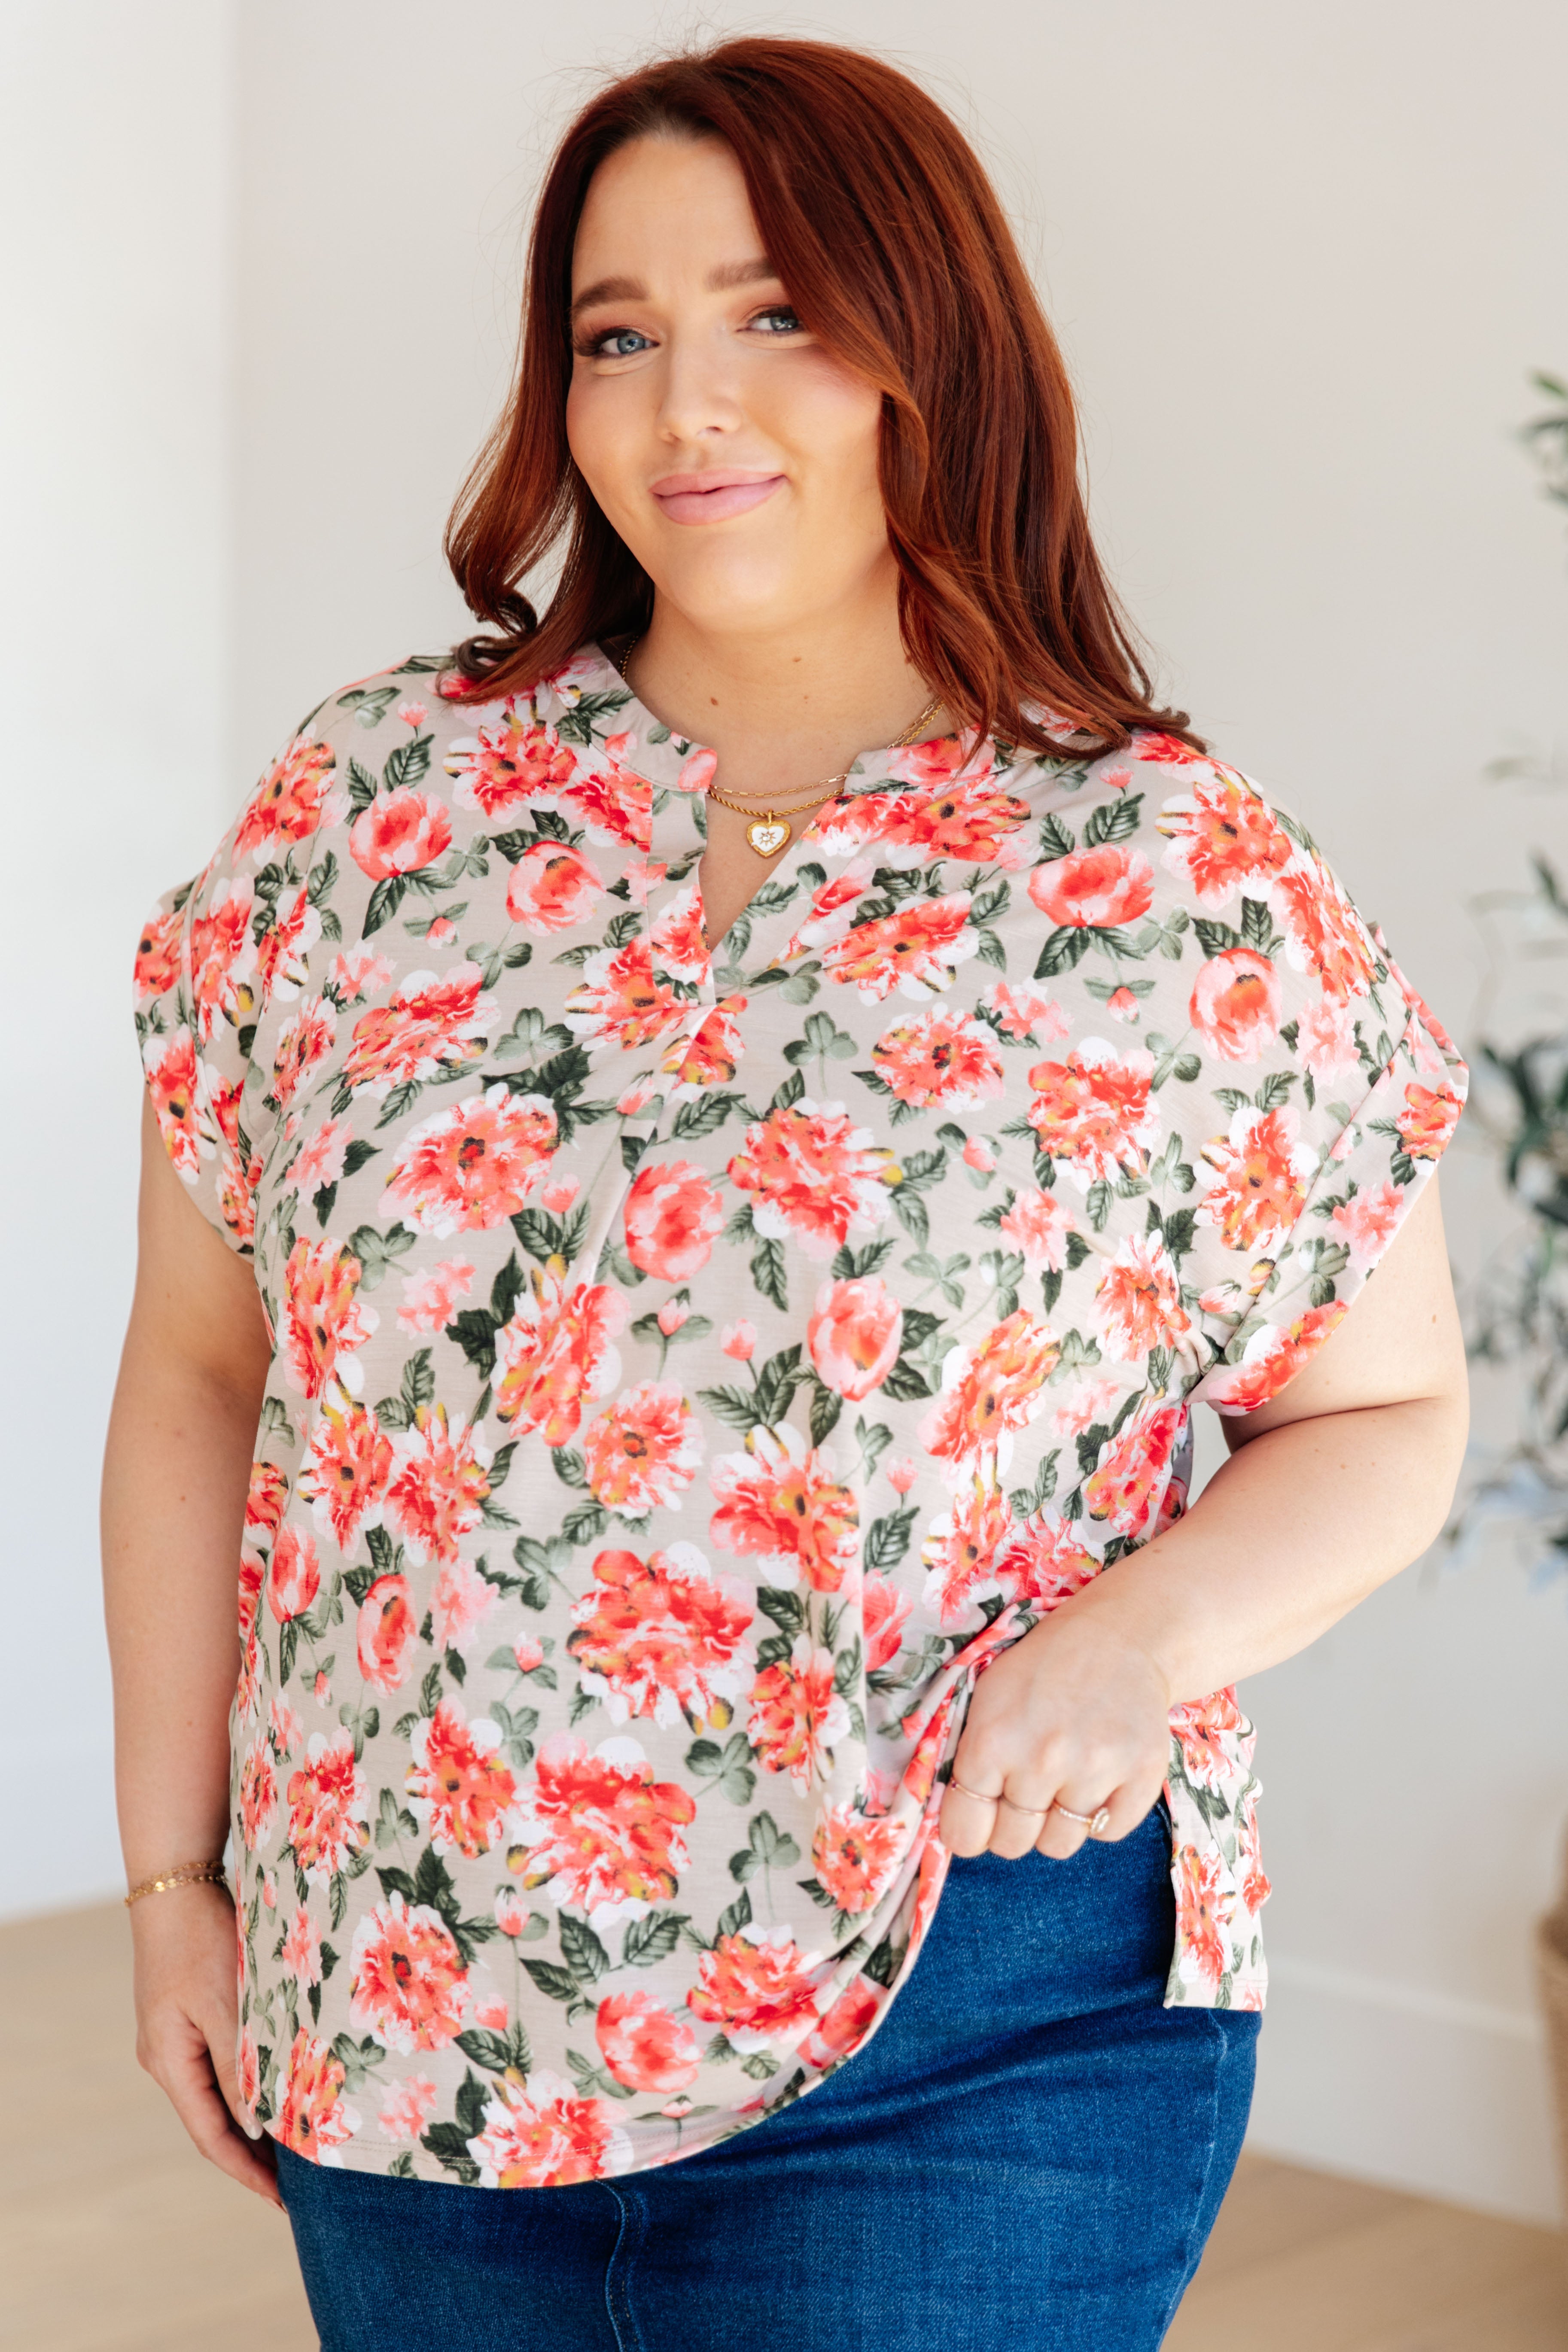 Dear Scarlett Lizzy Cap Sleeve Top in Coral and Beige Floral Final Sale Monday Markdown 06-04